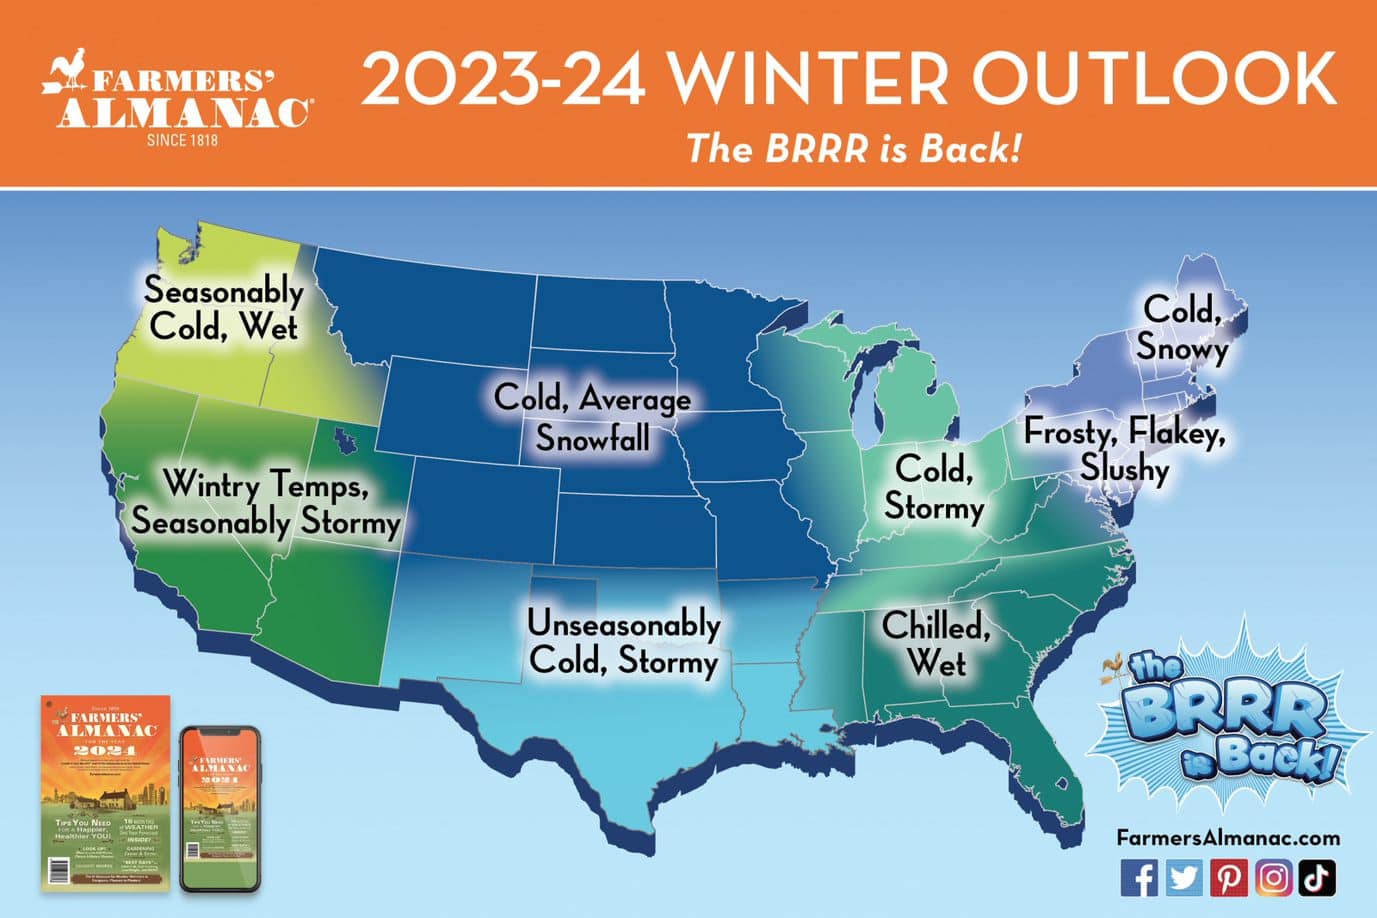 Both farmers’ almanacs have announced their winter weather predictions